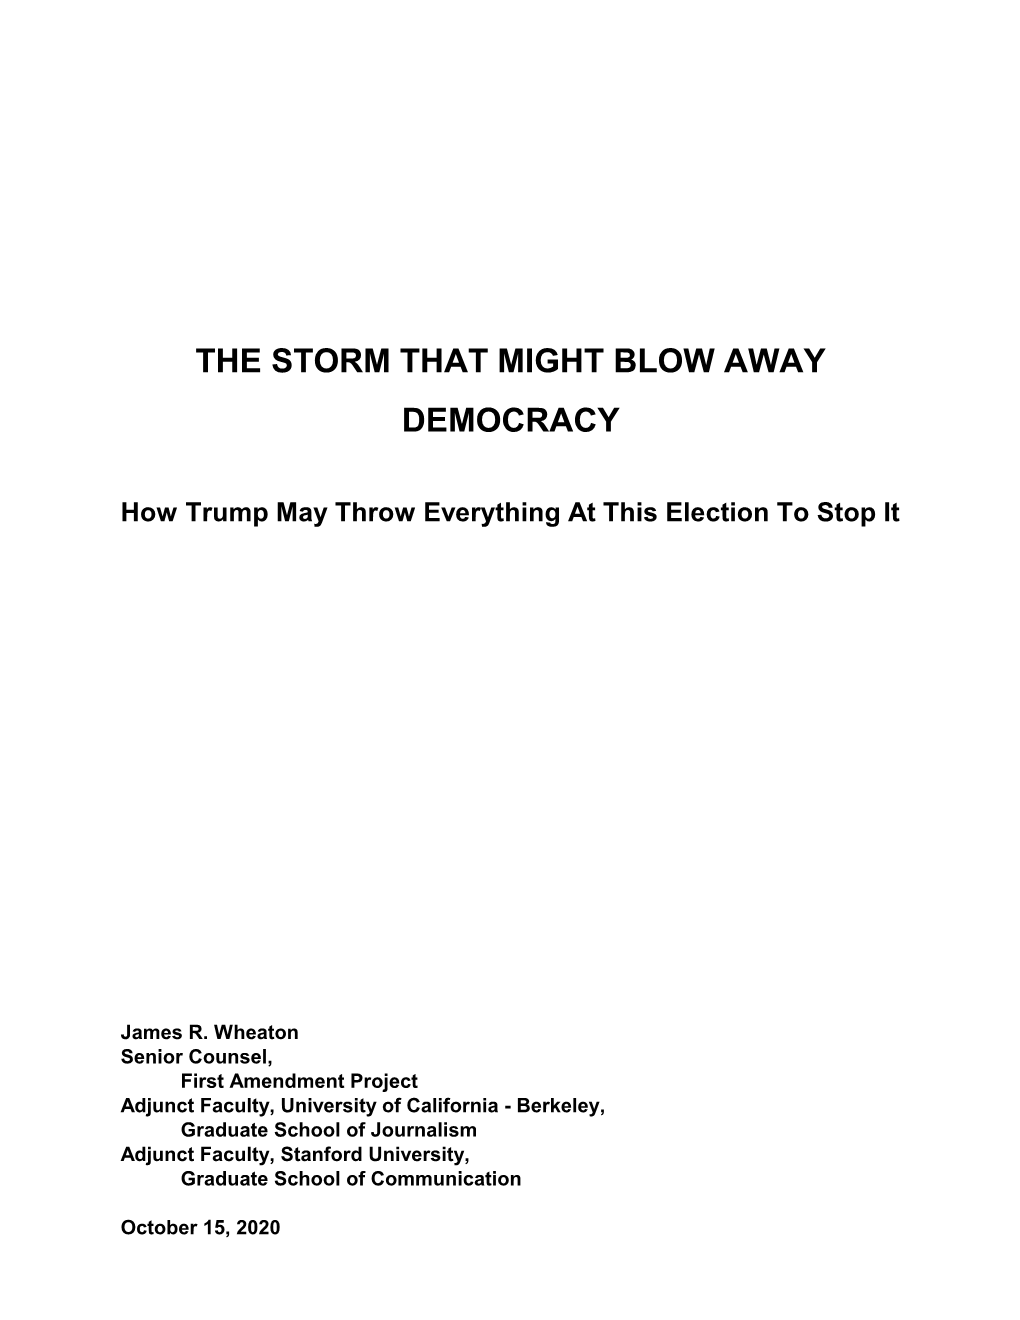 The Storm That Might Blow Away Democracy